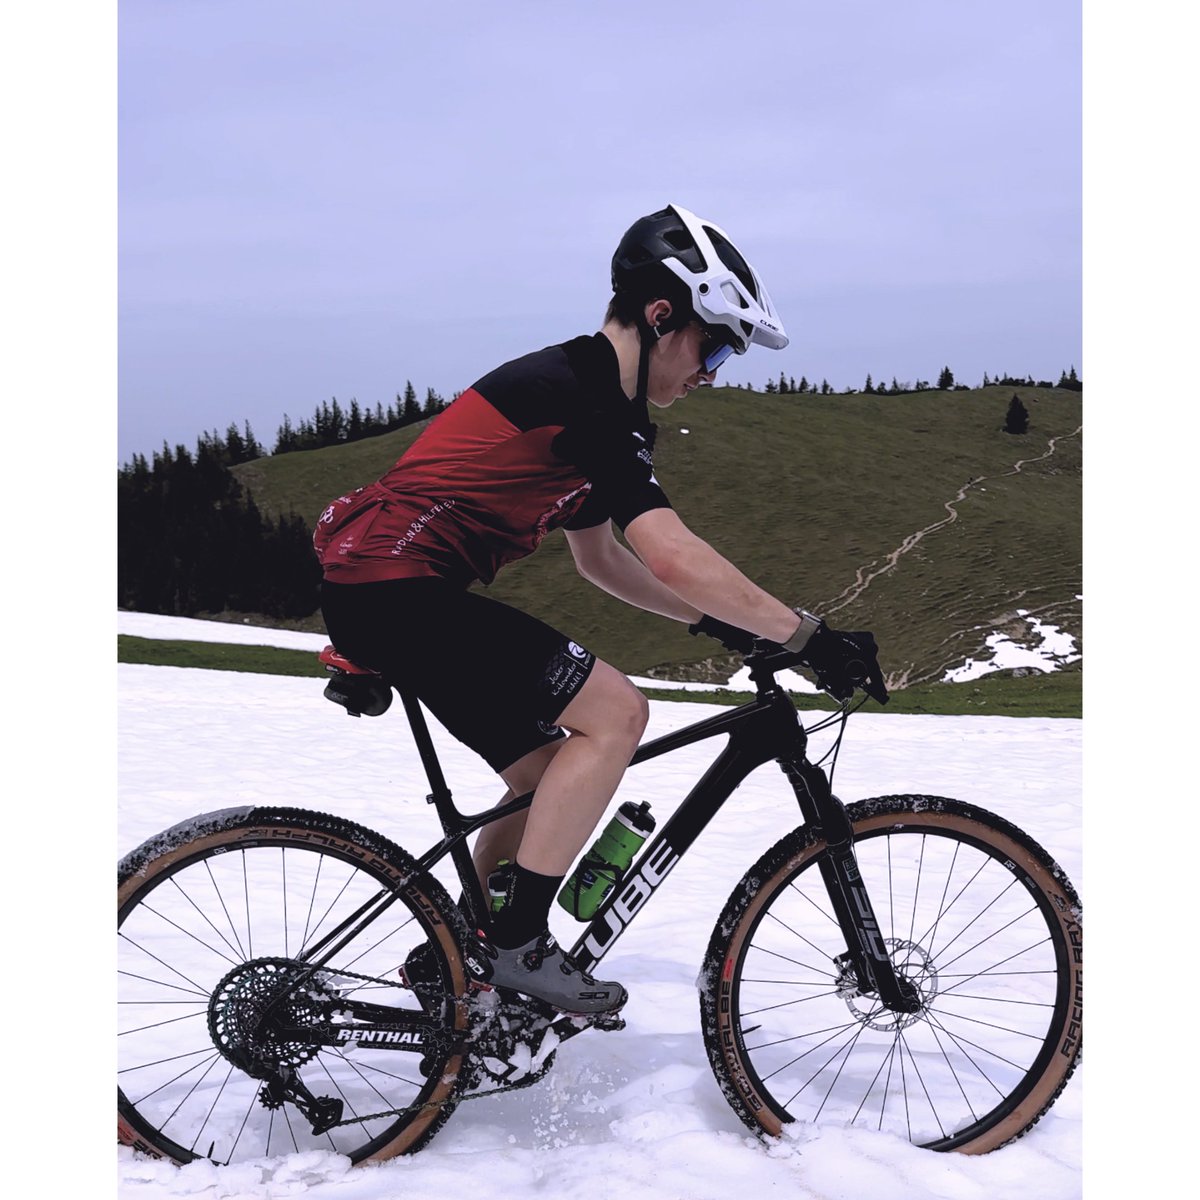 Tamed the partly snow-covered peak of the Kampenwand. Tried a few different editing styles on all of the photos. @affinitybyserif #affinityphoto #nofilterneeded #nofilter #mtb #mtbphotography #mtbtraining #cubebikes #mtblife #mountainphotography #iphonephotography #madeinaffinity